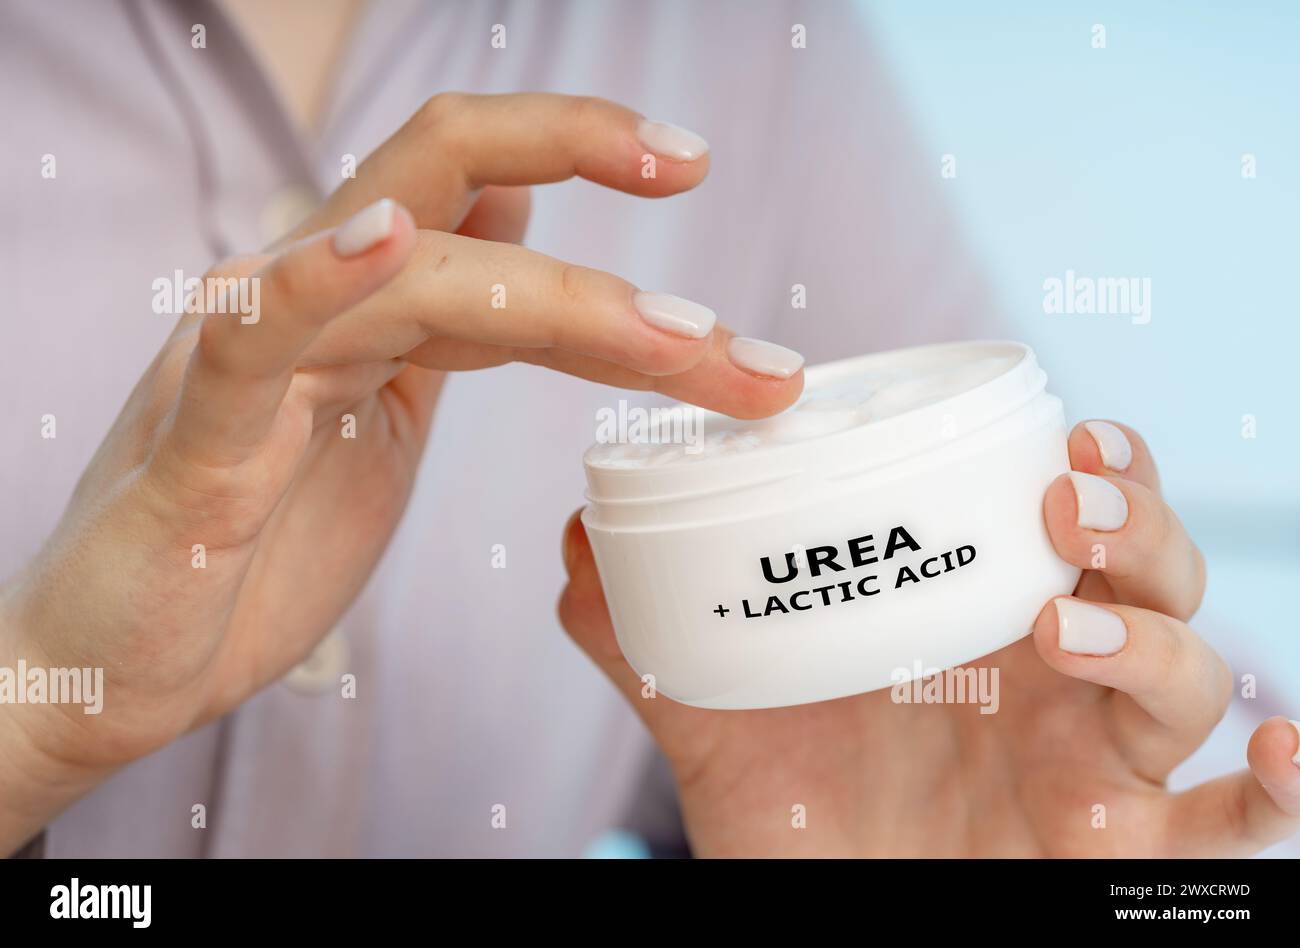 Urea and lactic acid medical cream, conceptual image. A combination cream used to moisturize and exfoliate dry, rough skin, particularly on the feet. Stock Photo